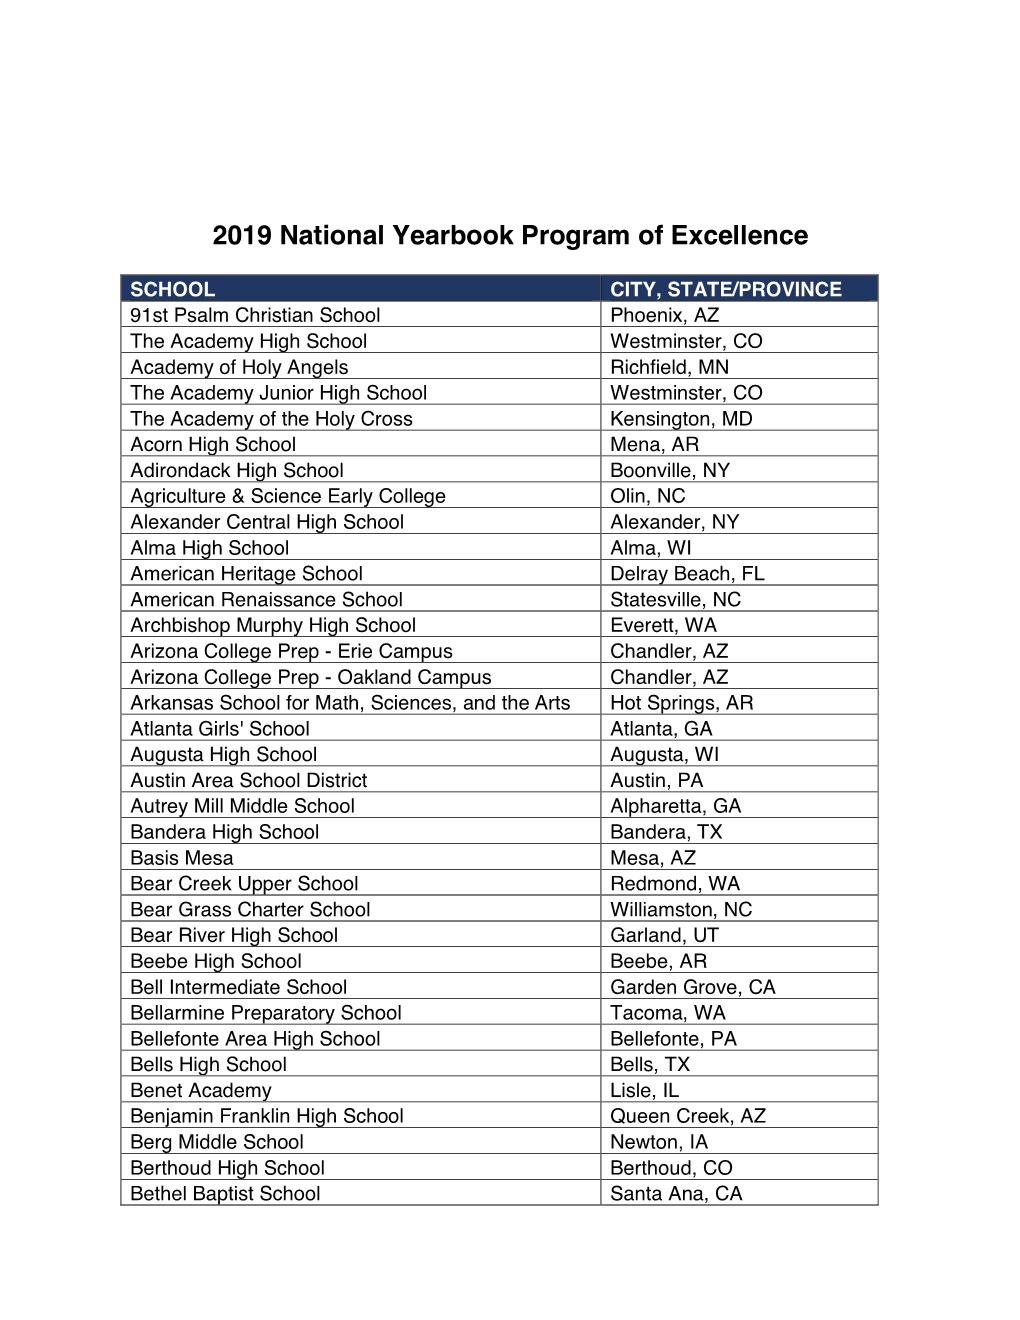 2019 National Yearbook Program of Excellence